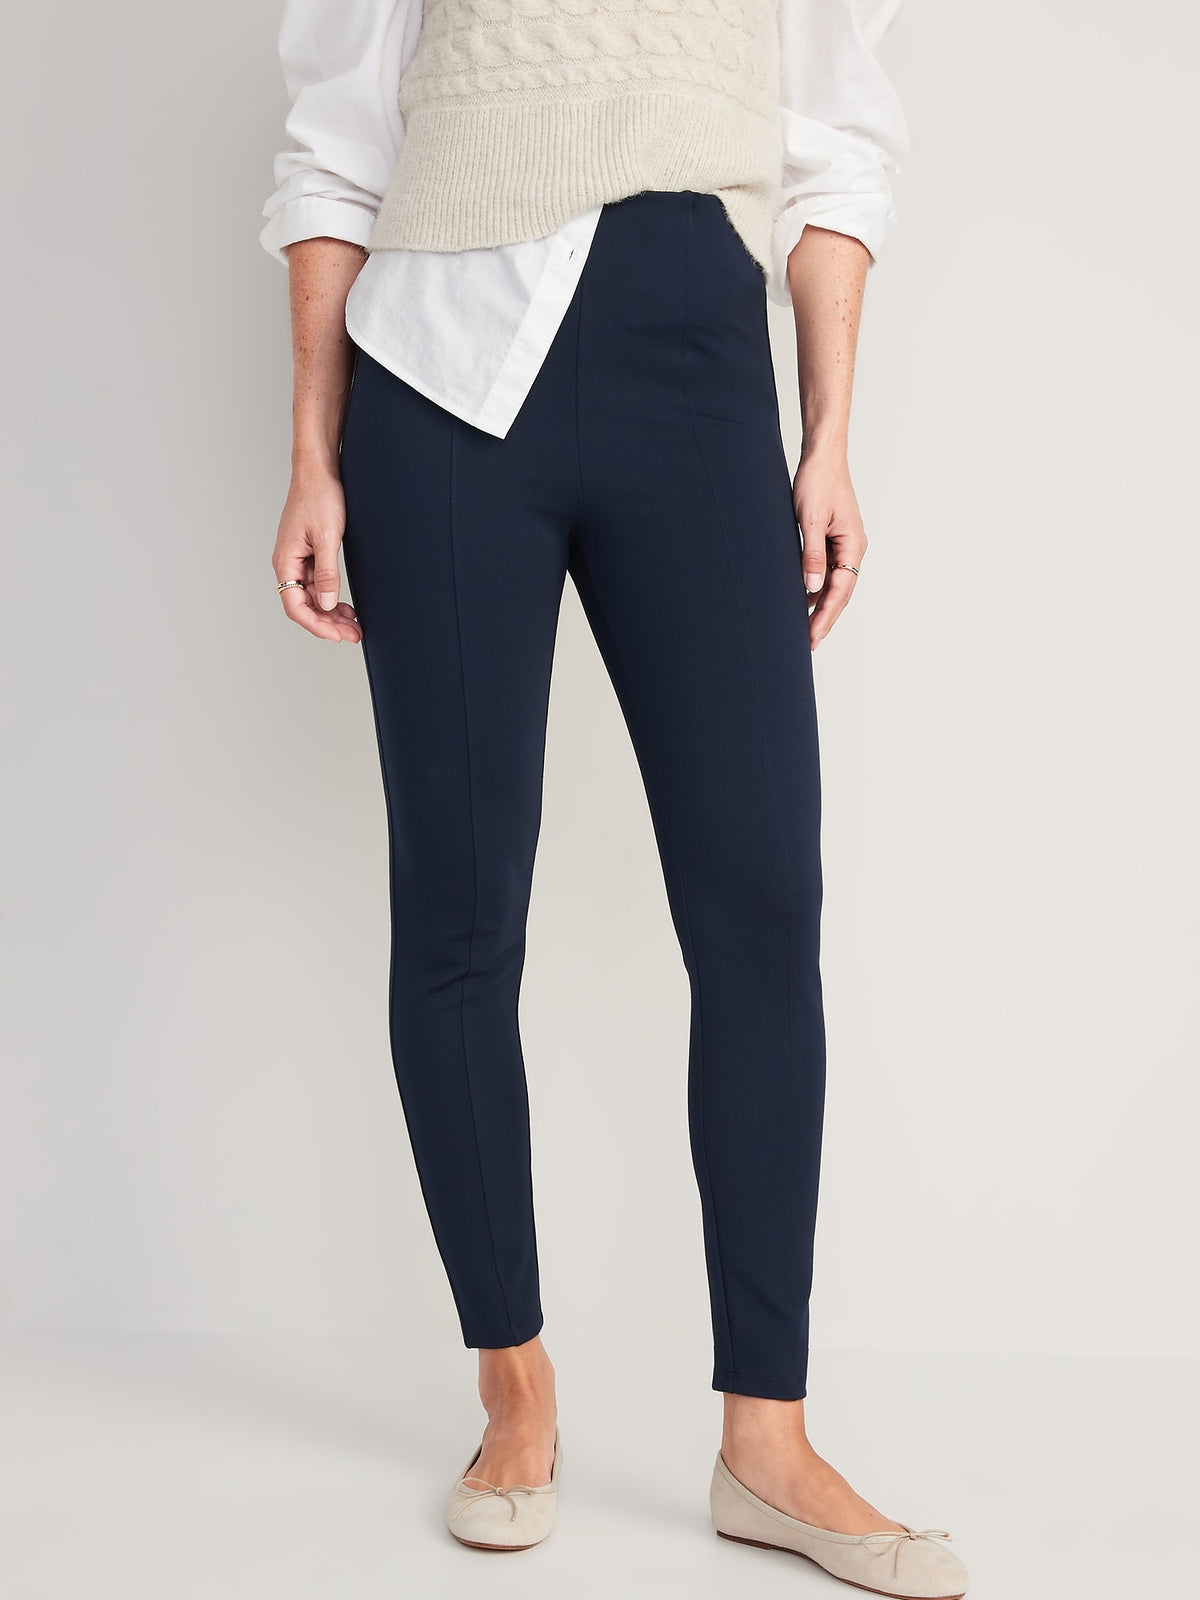 Extra High-Waisted Stevie Skinny Ankle Pants for Women - Old Navy